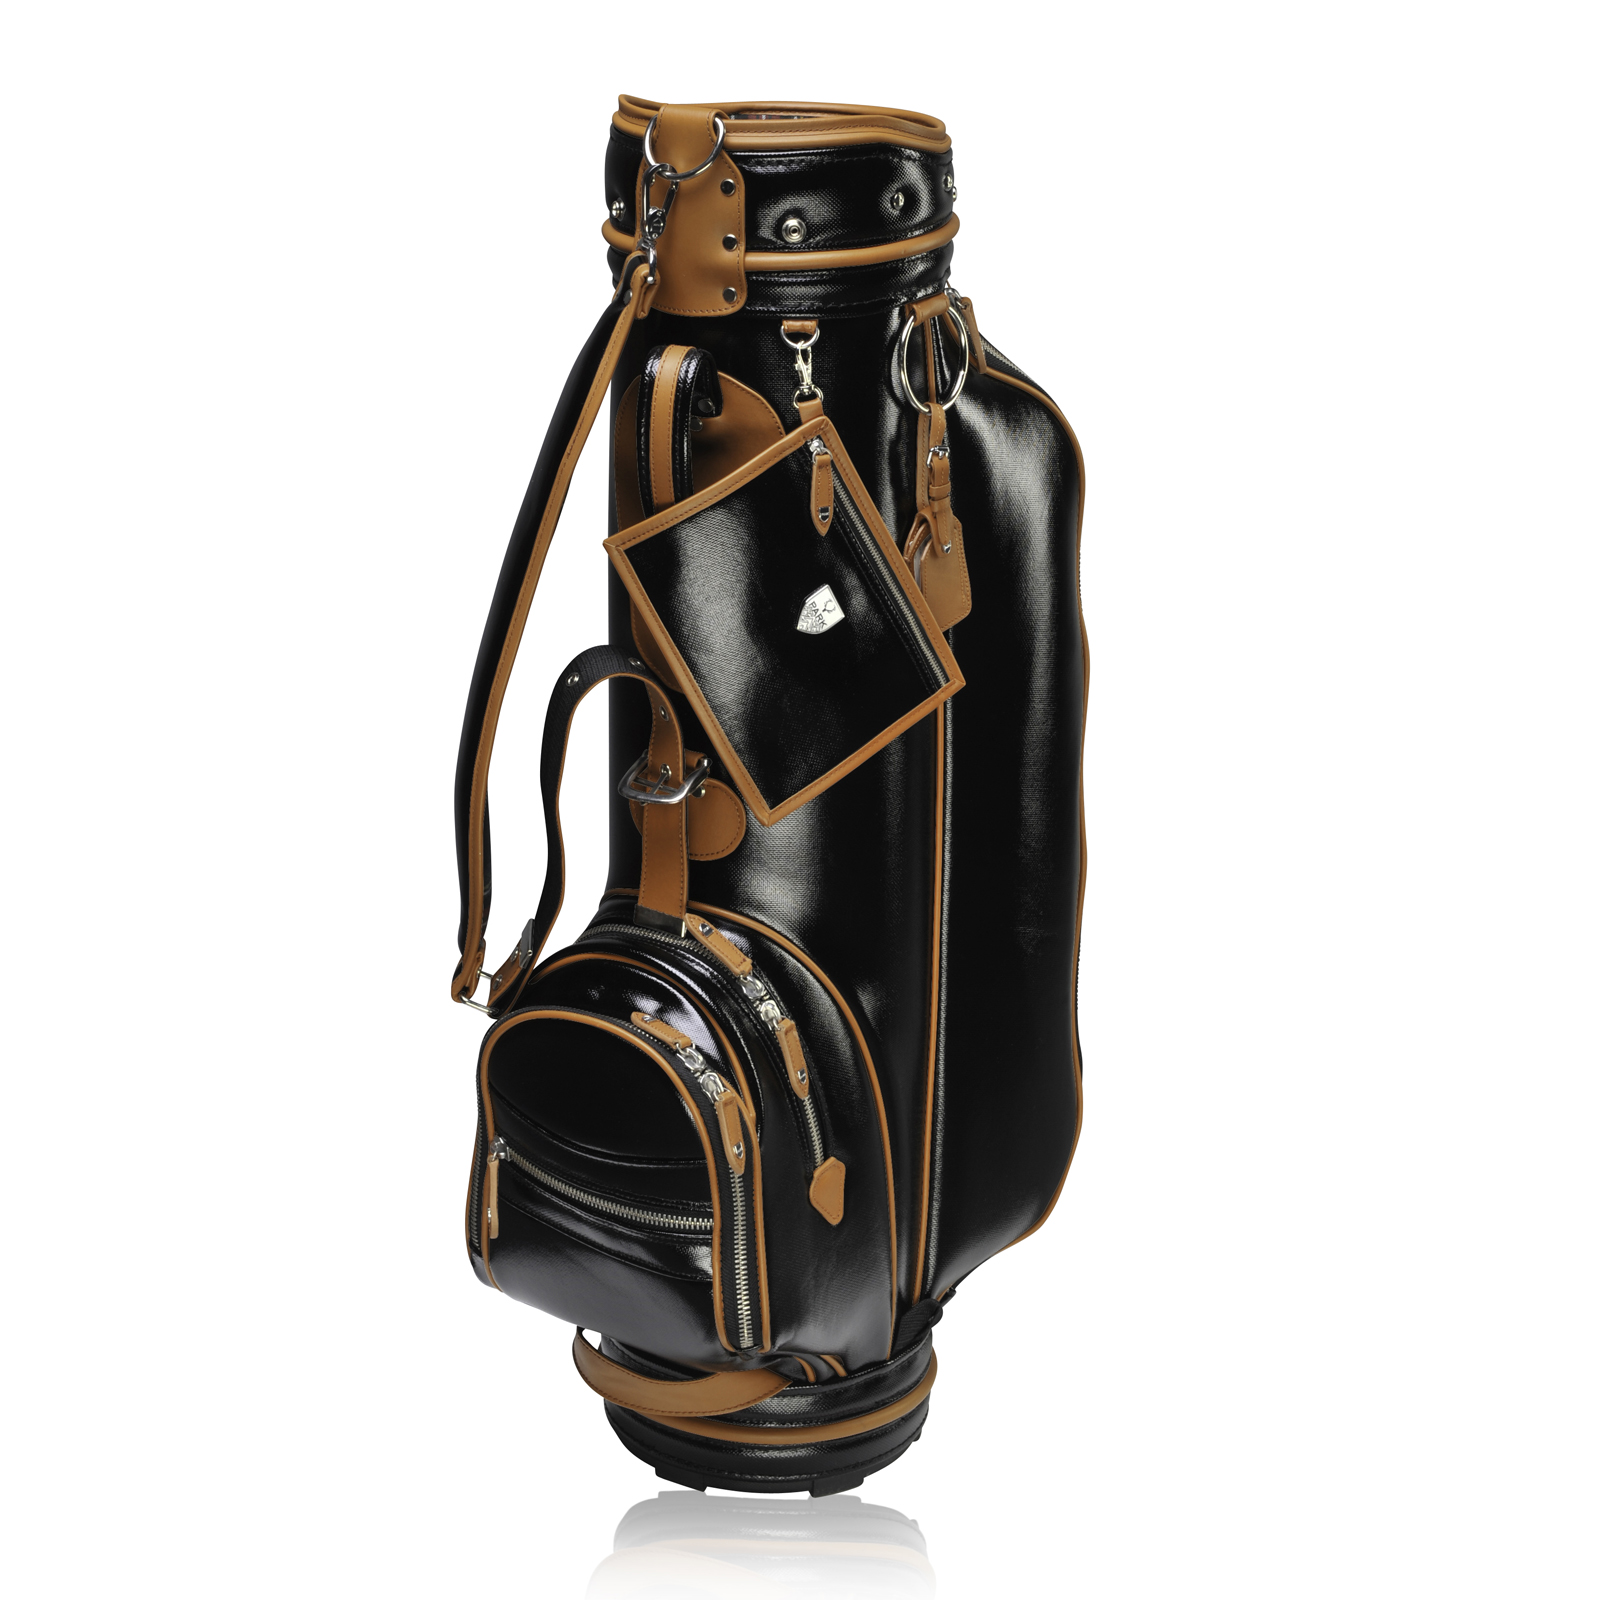 VERY curated park accessories garnet golf bag